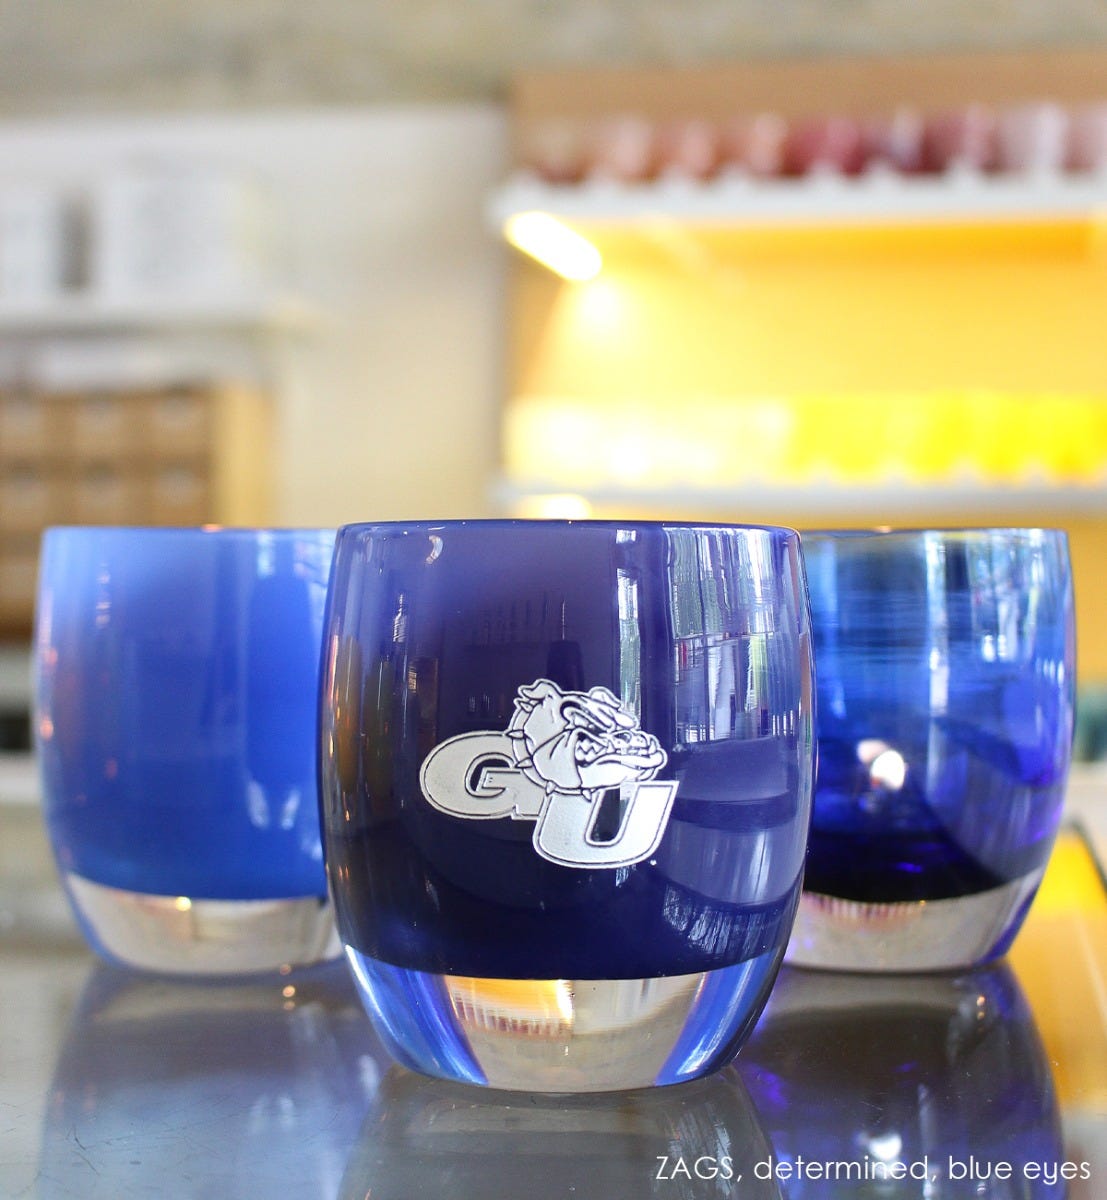 zags, gonzaga university mascot logo in silver on navy blue, hand-blown glass votive candle holder. Paired with determined and blue eyes on a store counter.